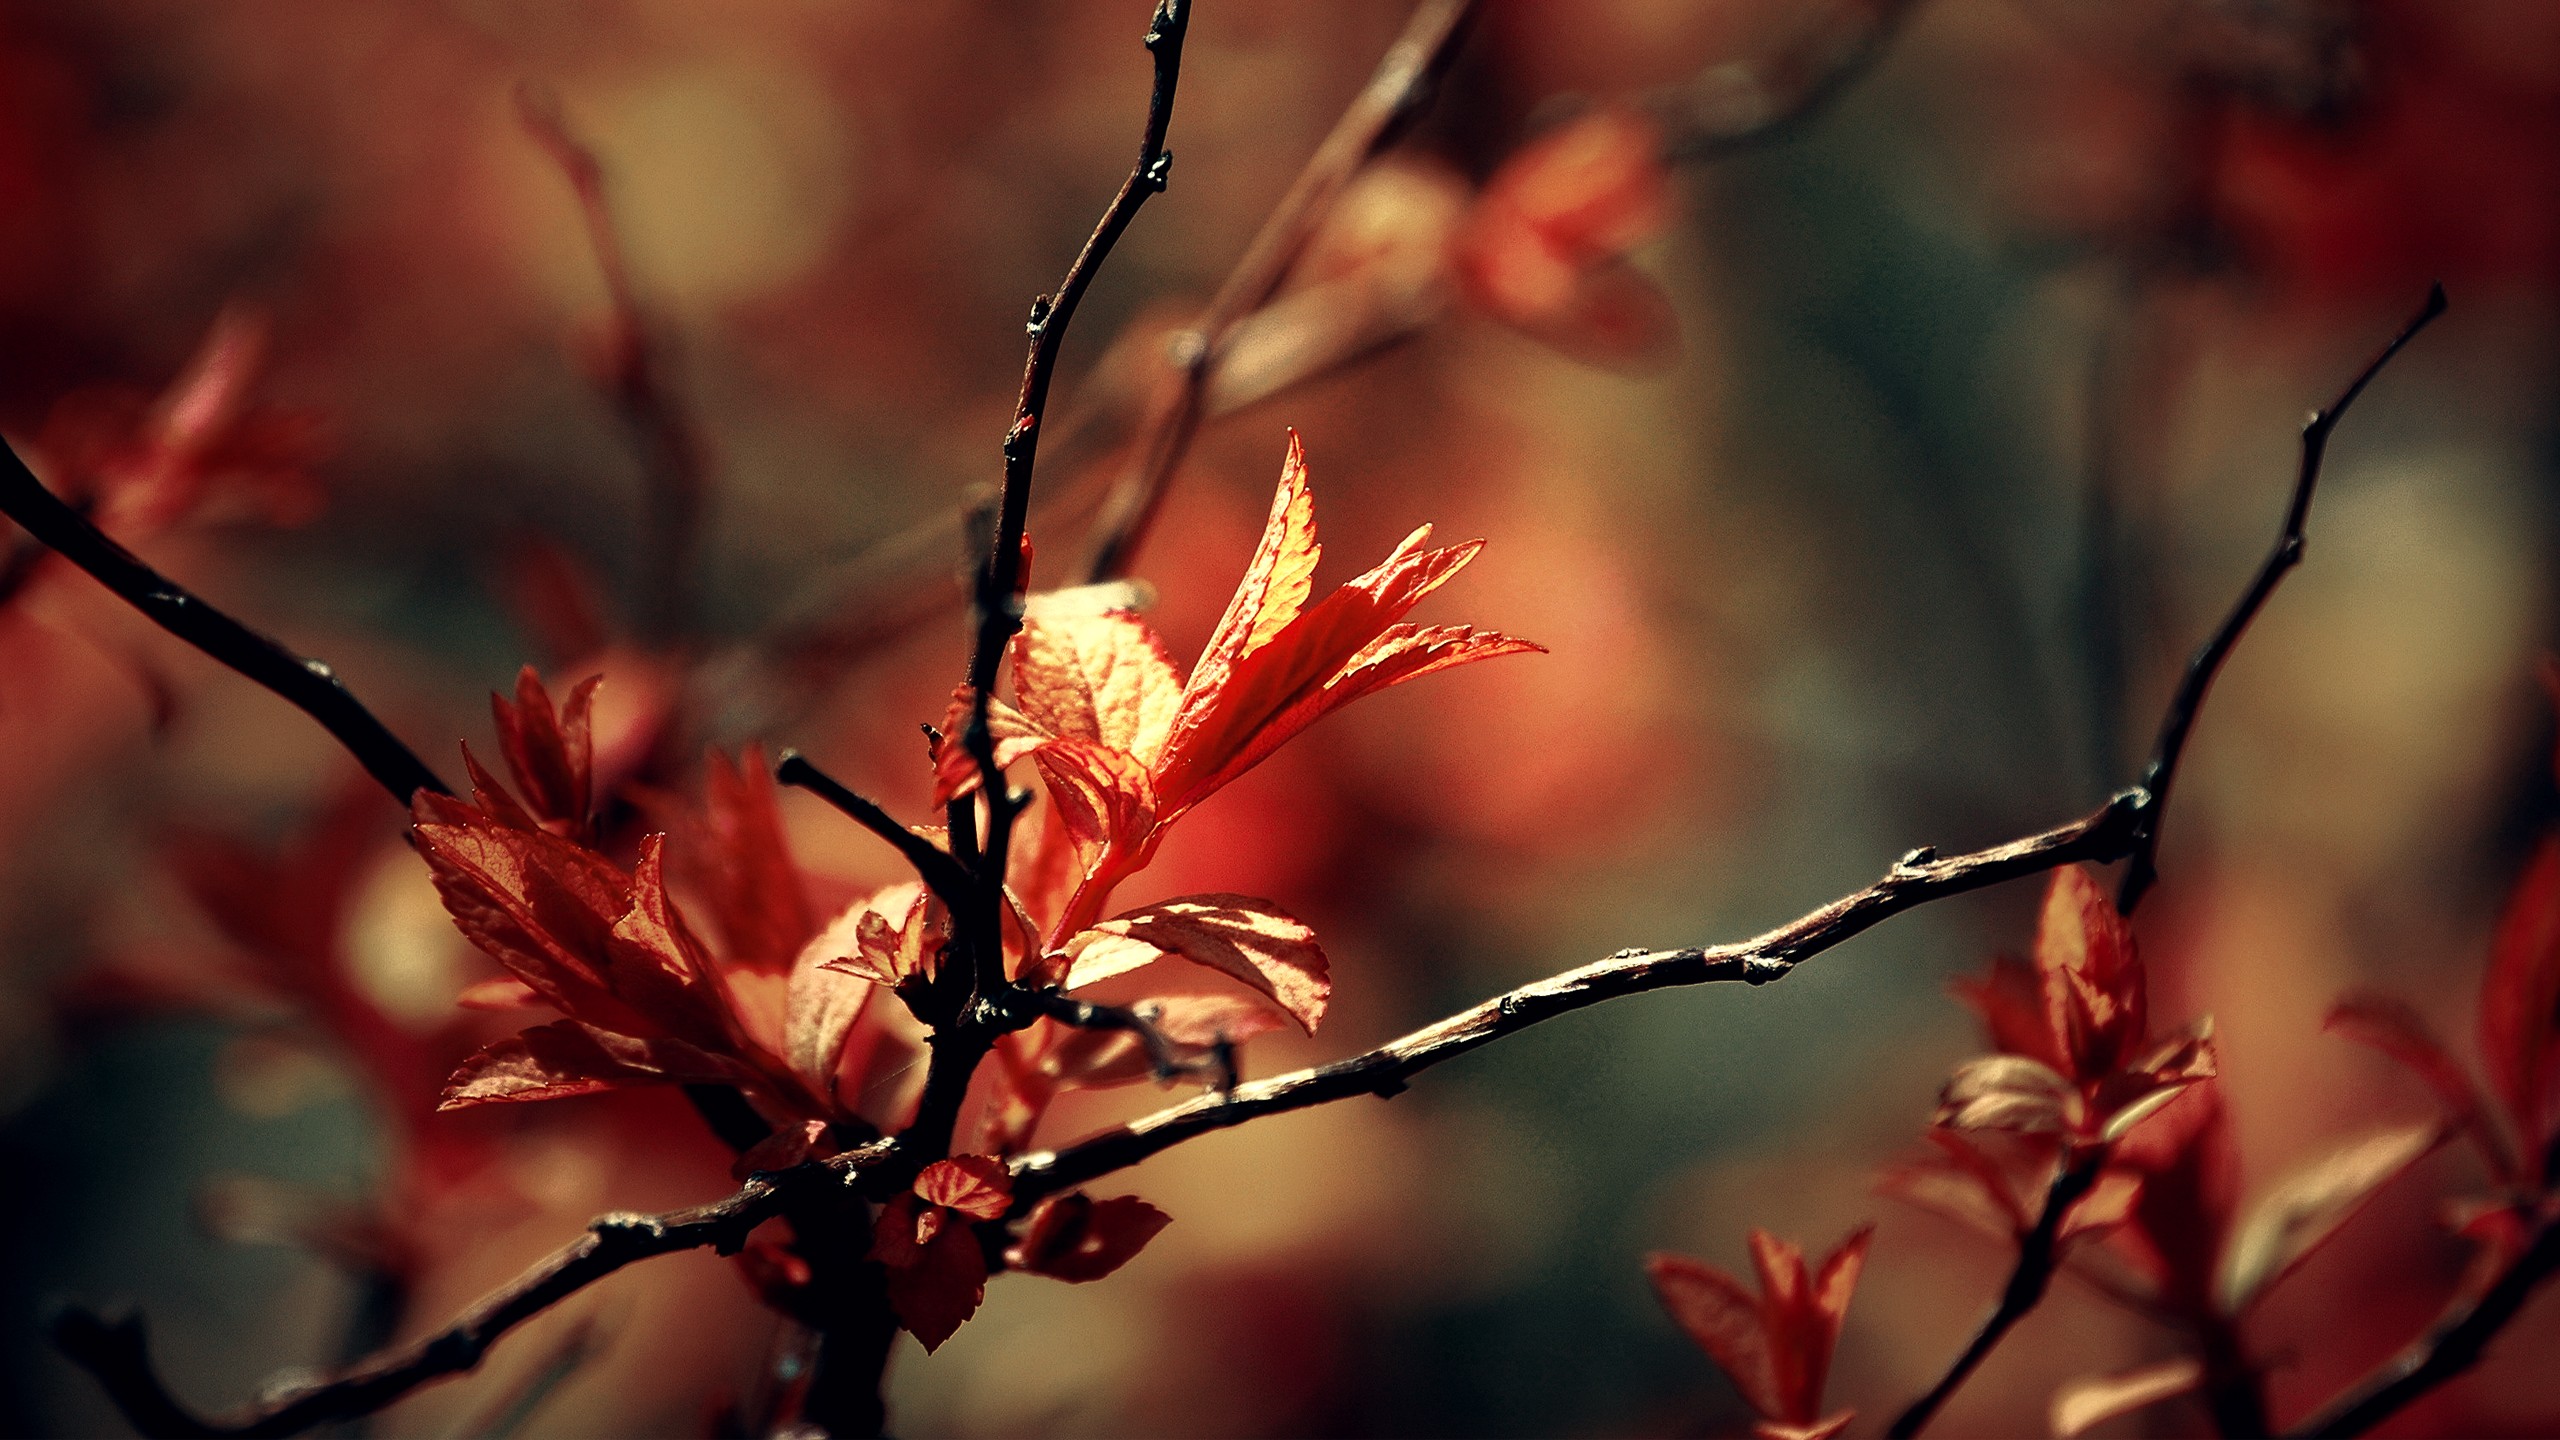 Wallpaper sunlight fall leaves depth of field nature red plants branch blossom spring twigs tree autumn leaf flower season flora petal twig botany woody plant close up macro photography x